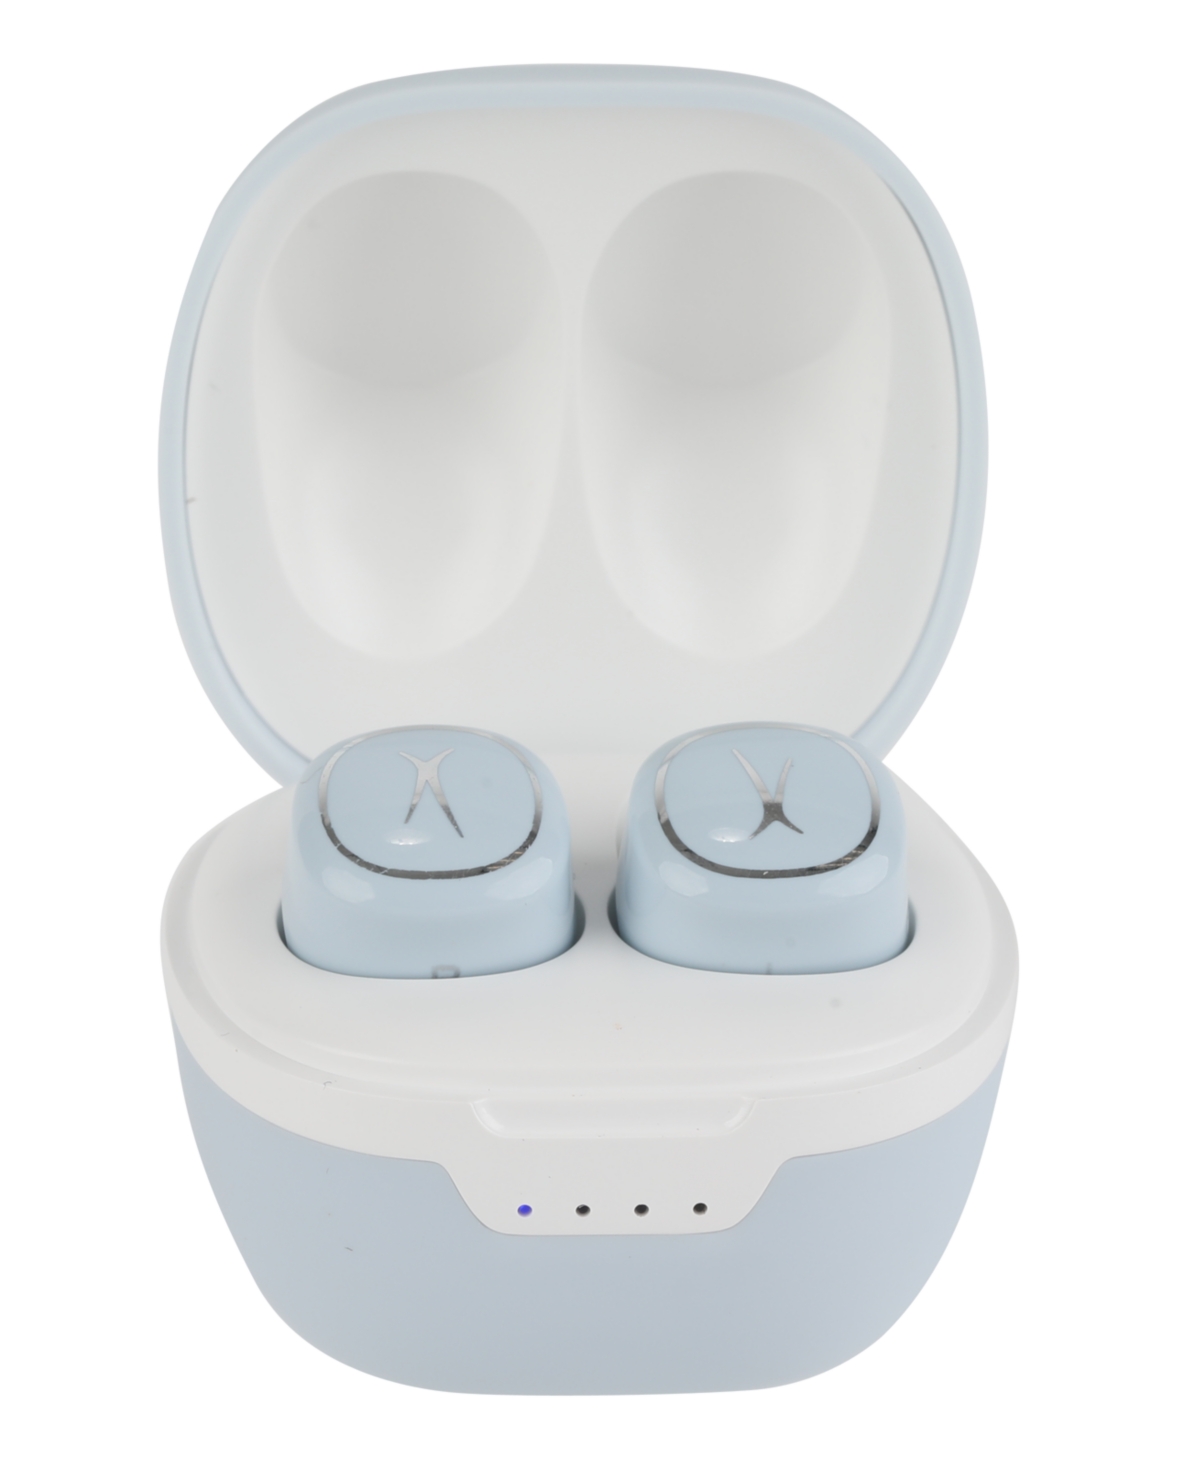 Altec Lansing Nanobud 2.0 True Wireless, Earbuds With Charging Case In Icy Blue